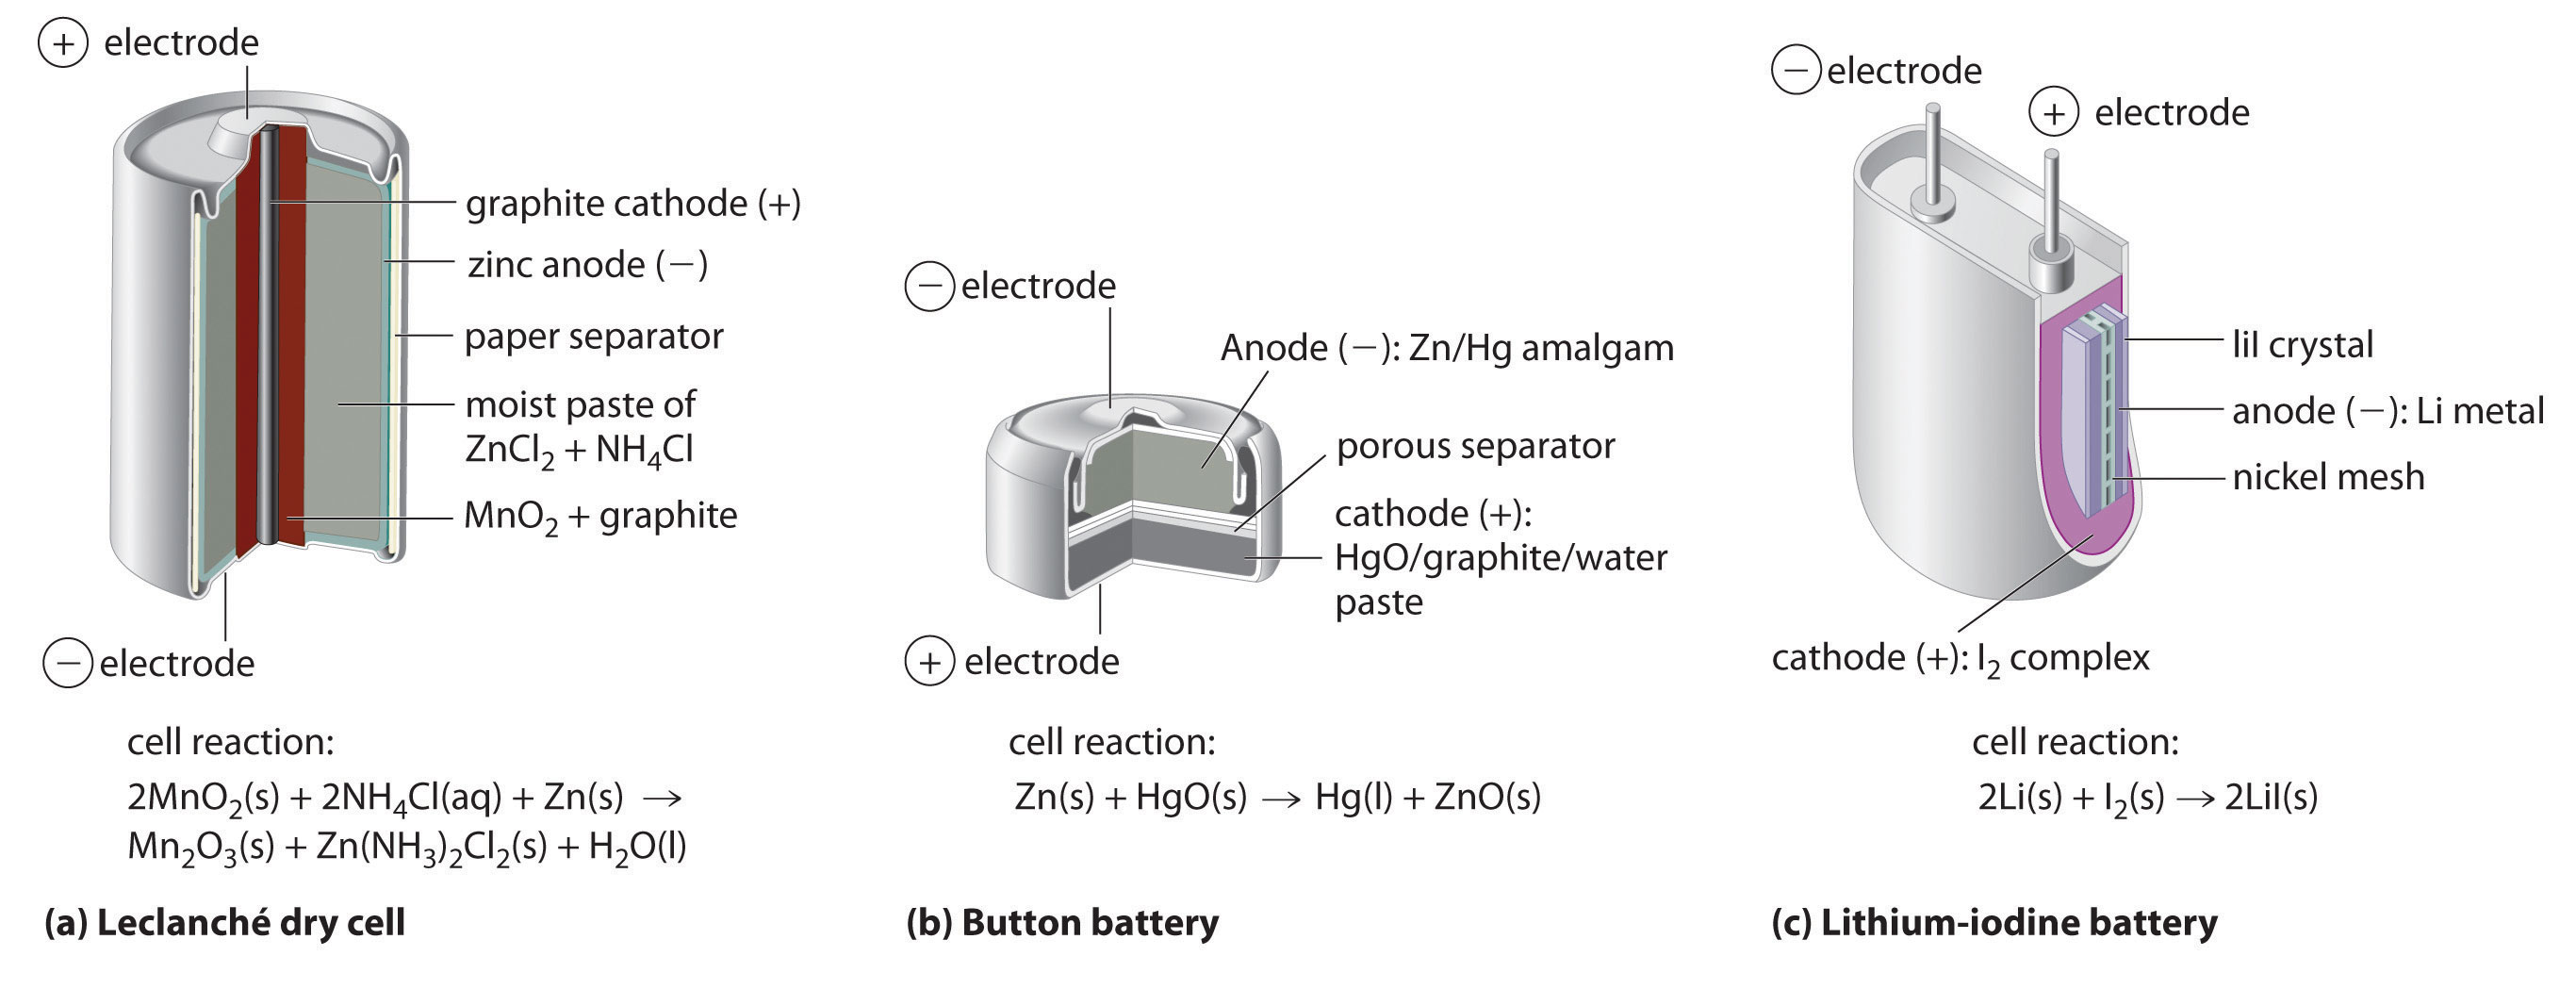 Batteries and Electrochemistry